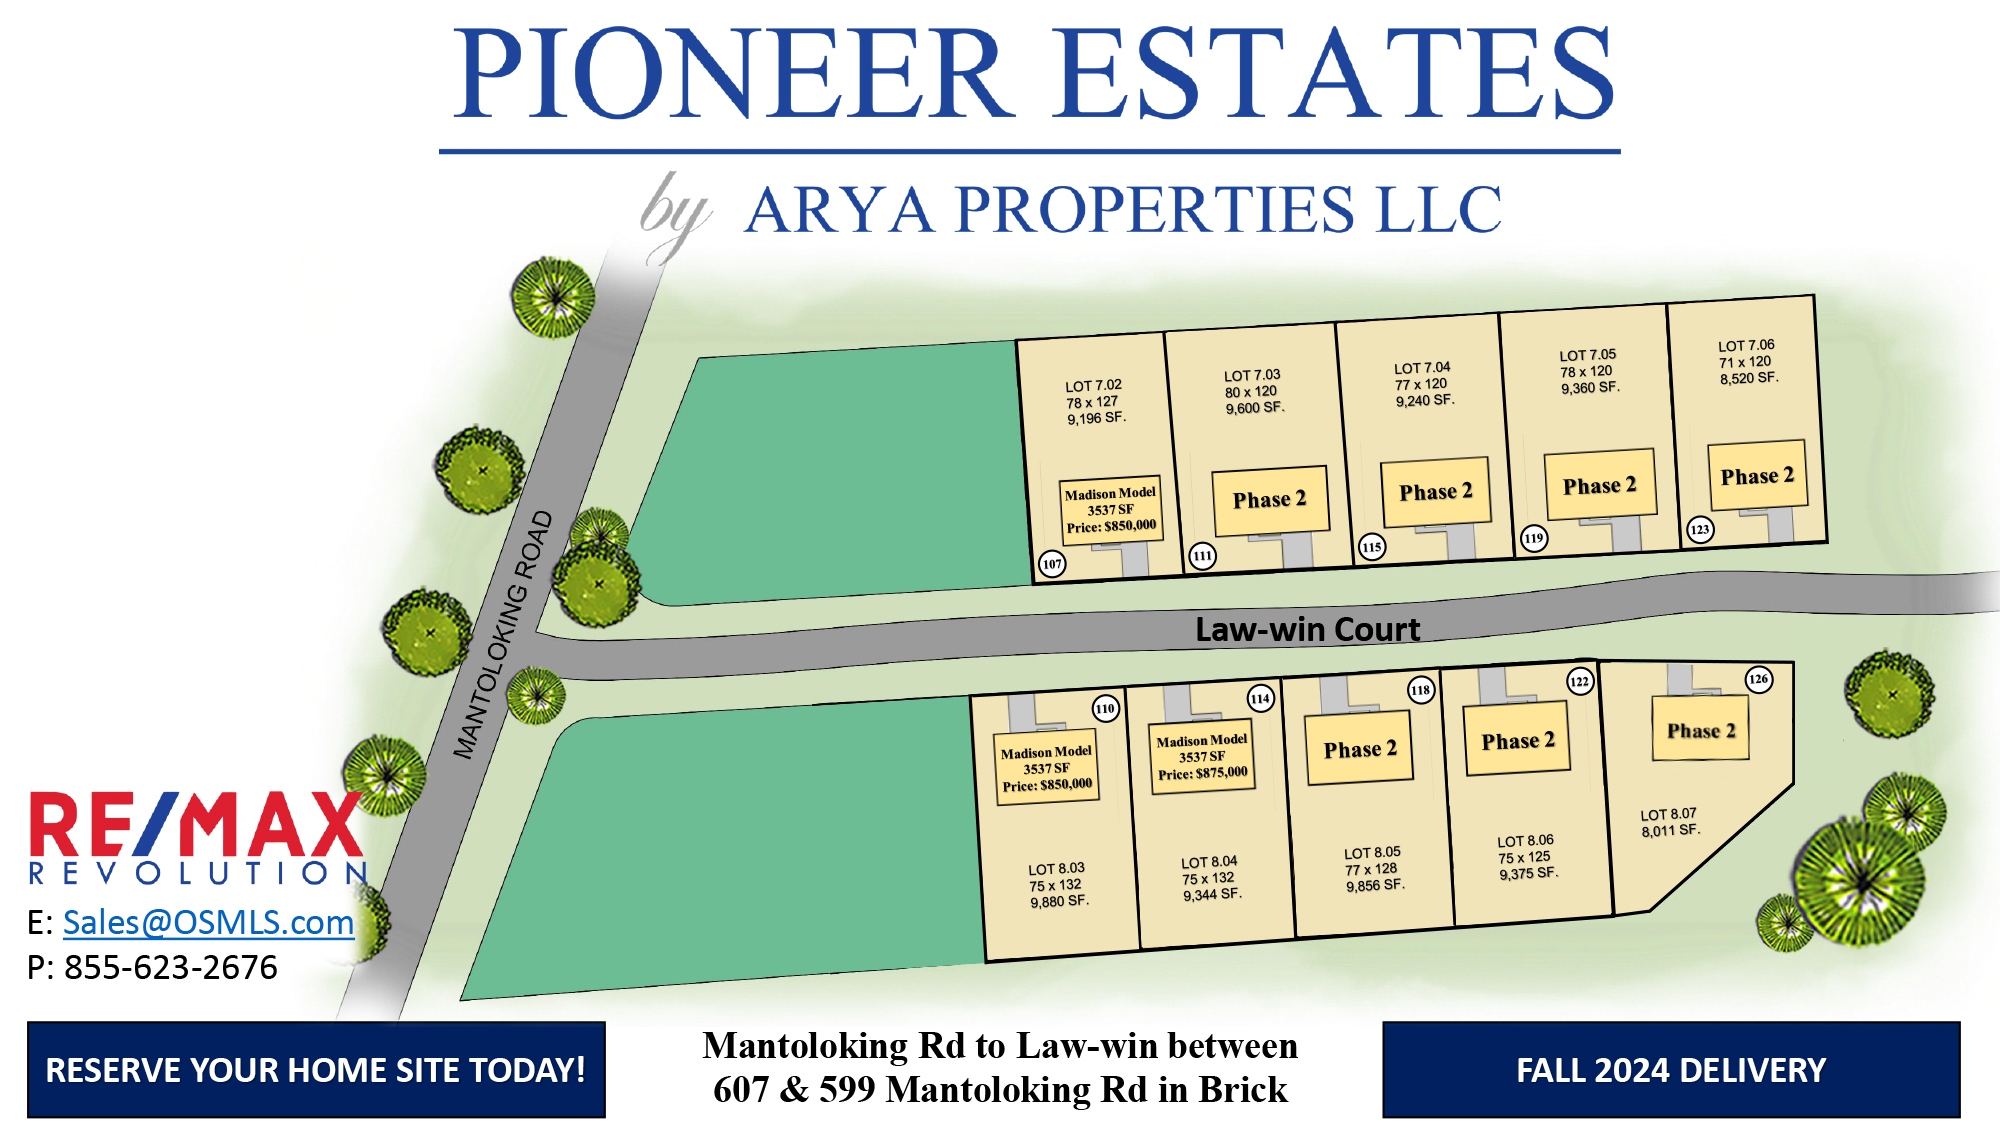 Pioneer Estates Phase 2 Available Lots